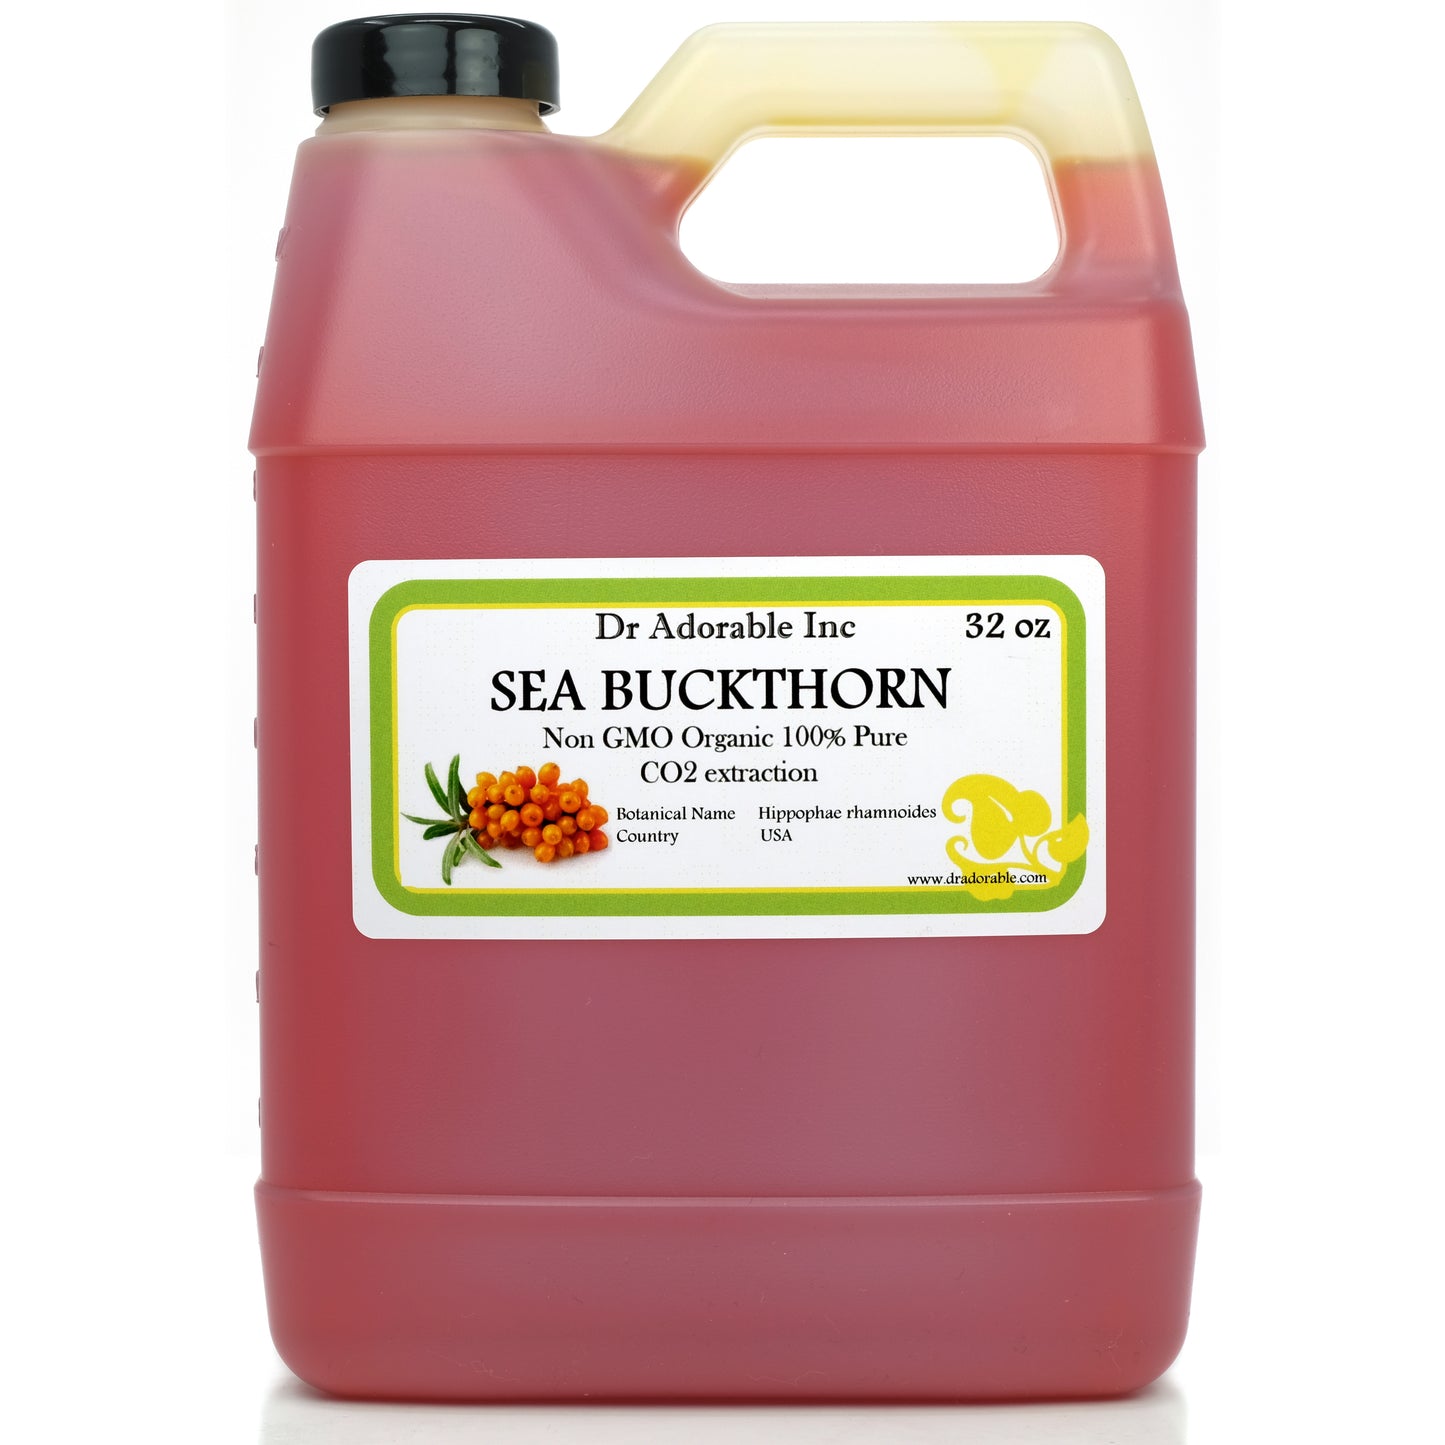 Sea Buckthorn Oil - 100% Pure Natural Premium Organic (Co2 Extracted)